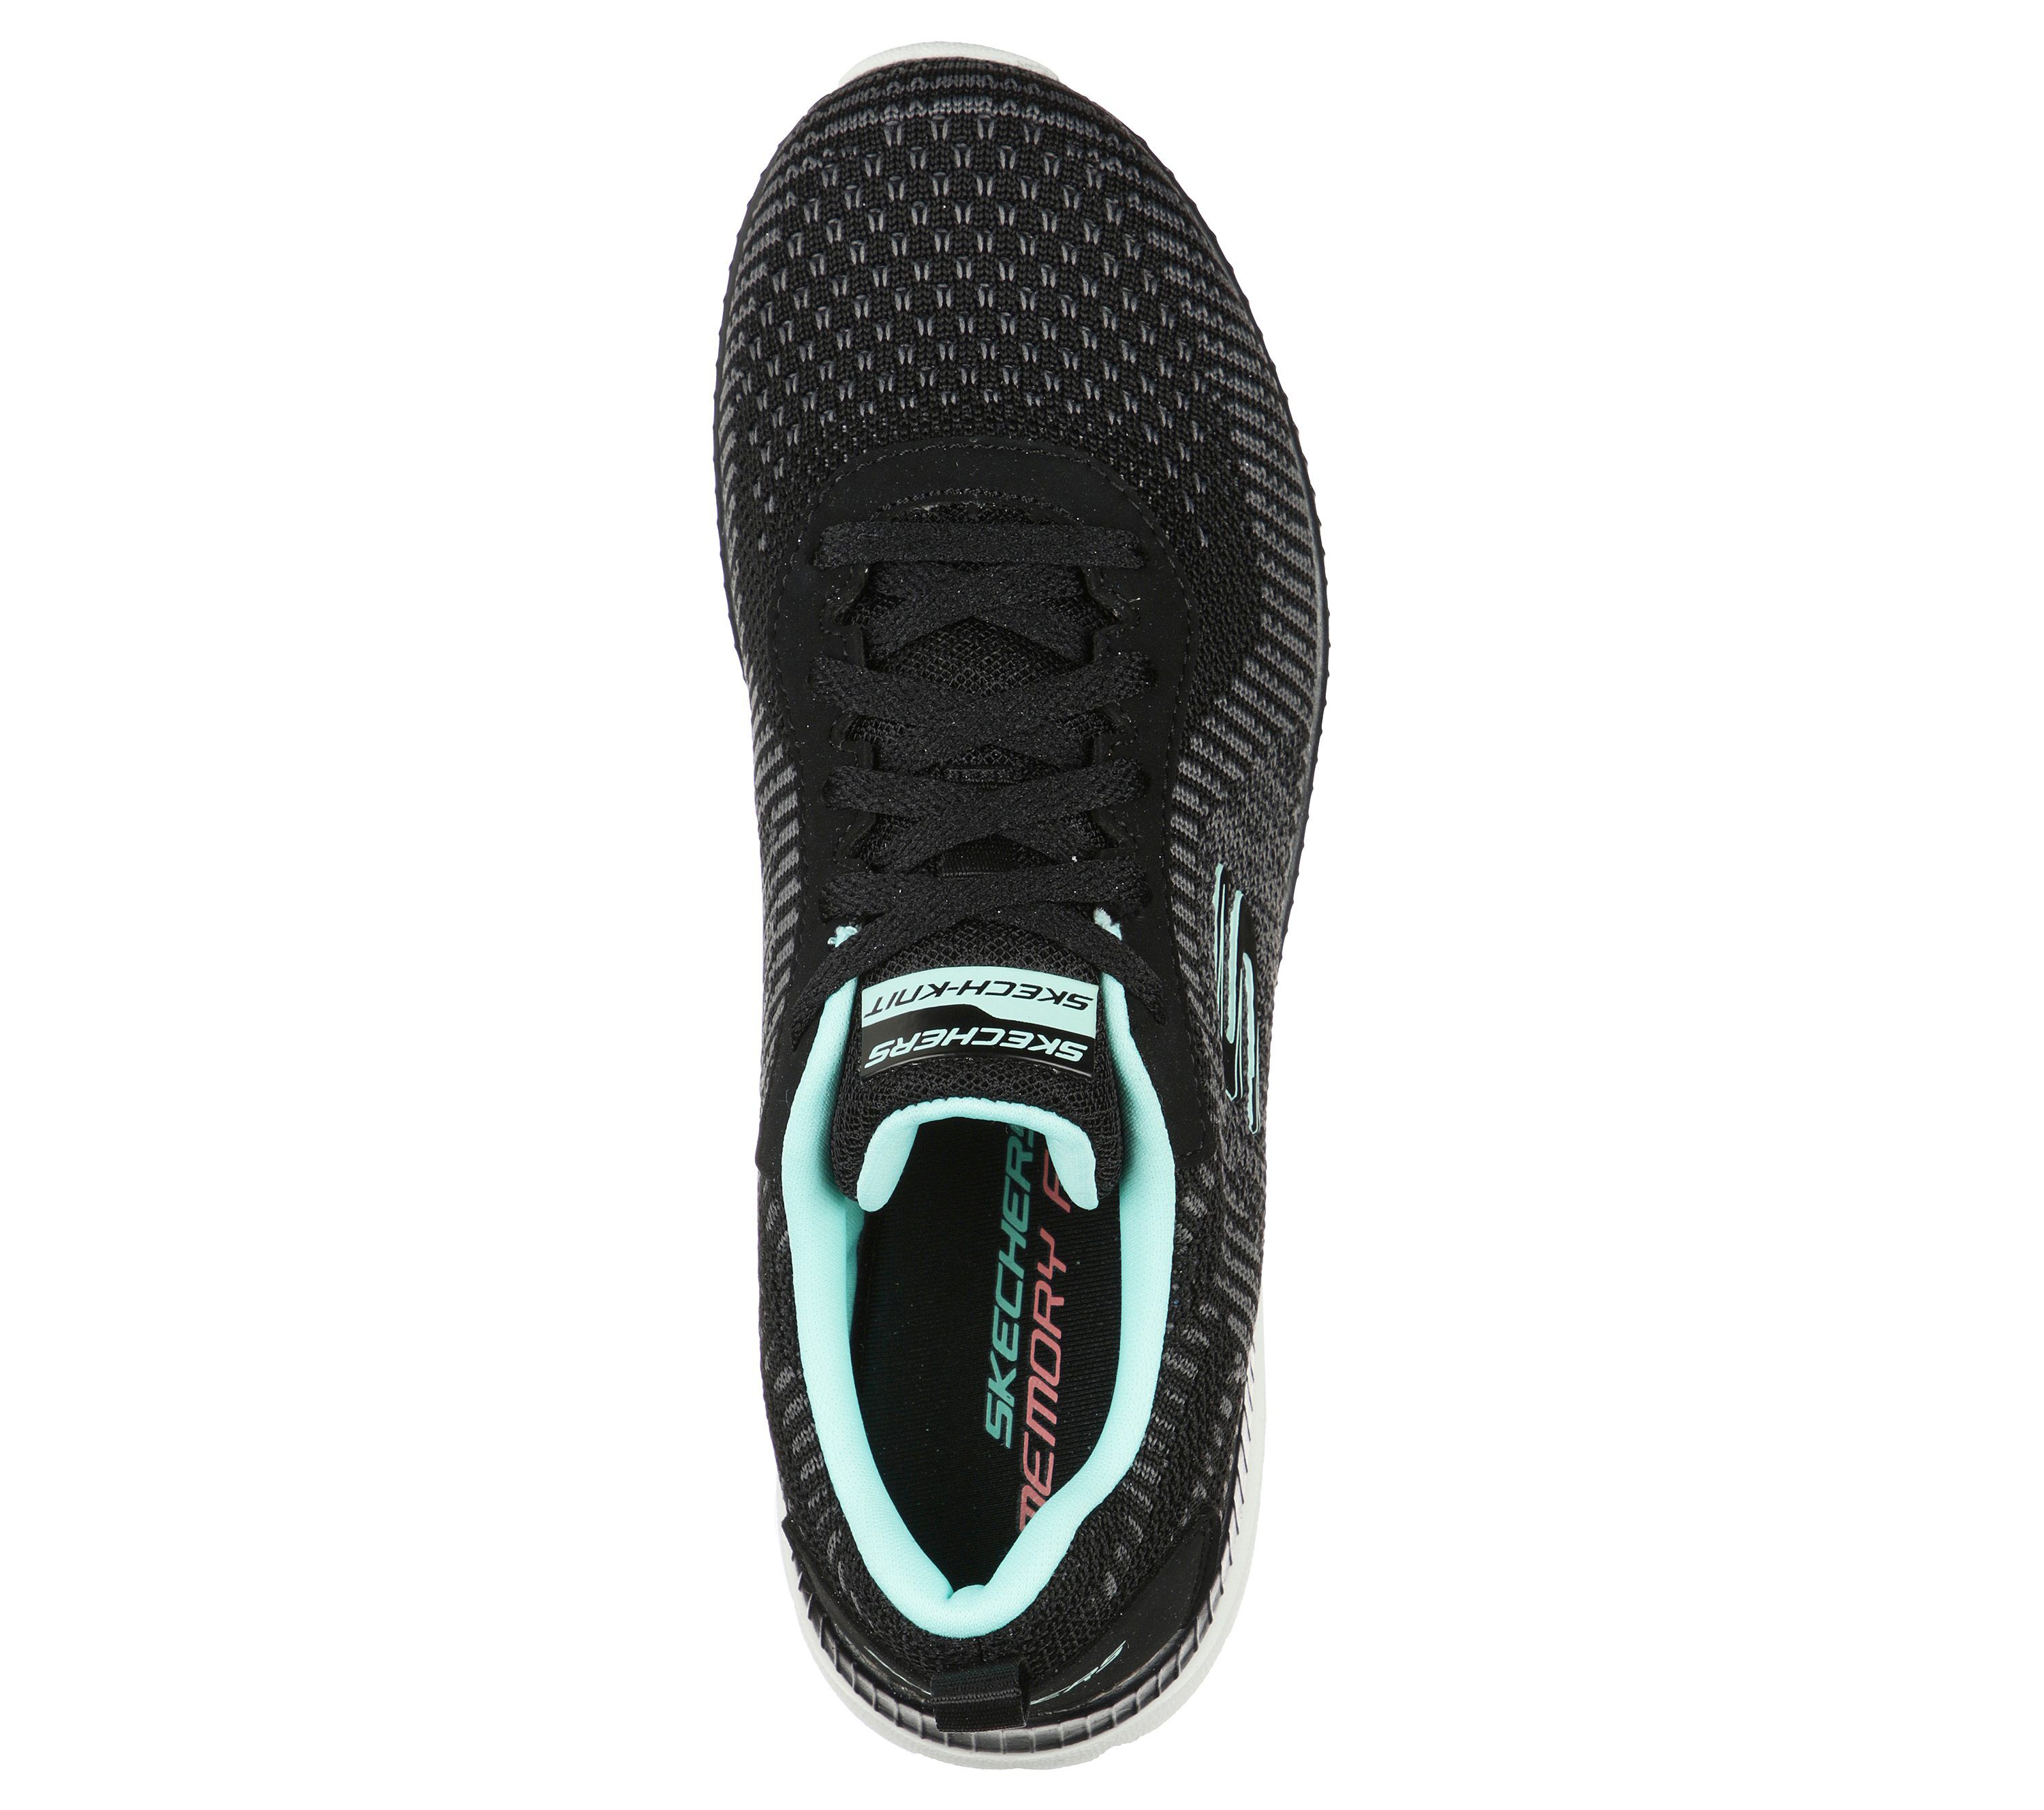 Skechers Bountiful - Purist - Black / Turquoise Polyester